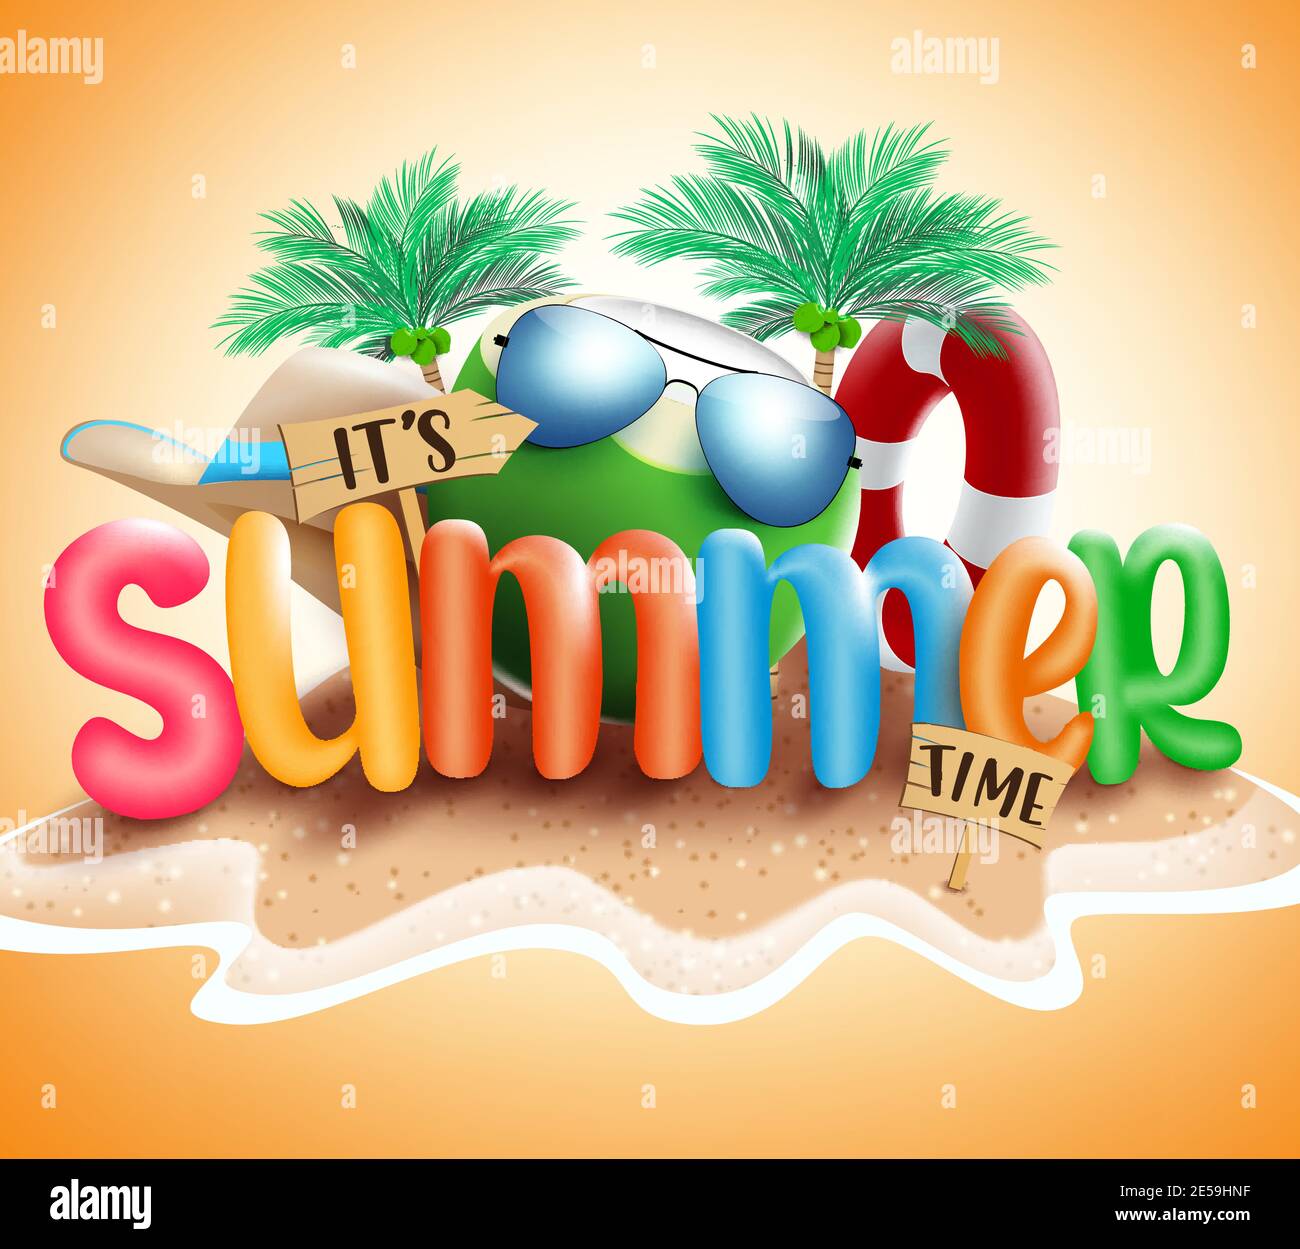 Its summer time Royalty Free Vector Image - VectorStock